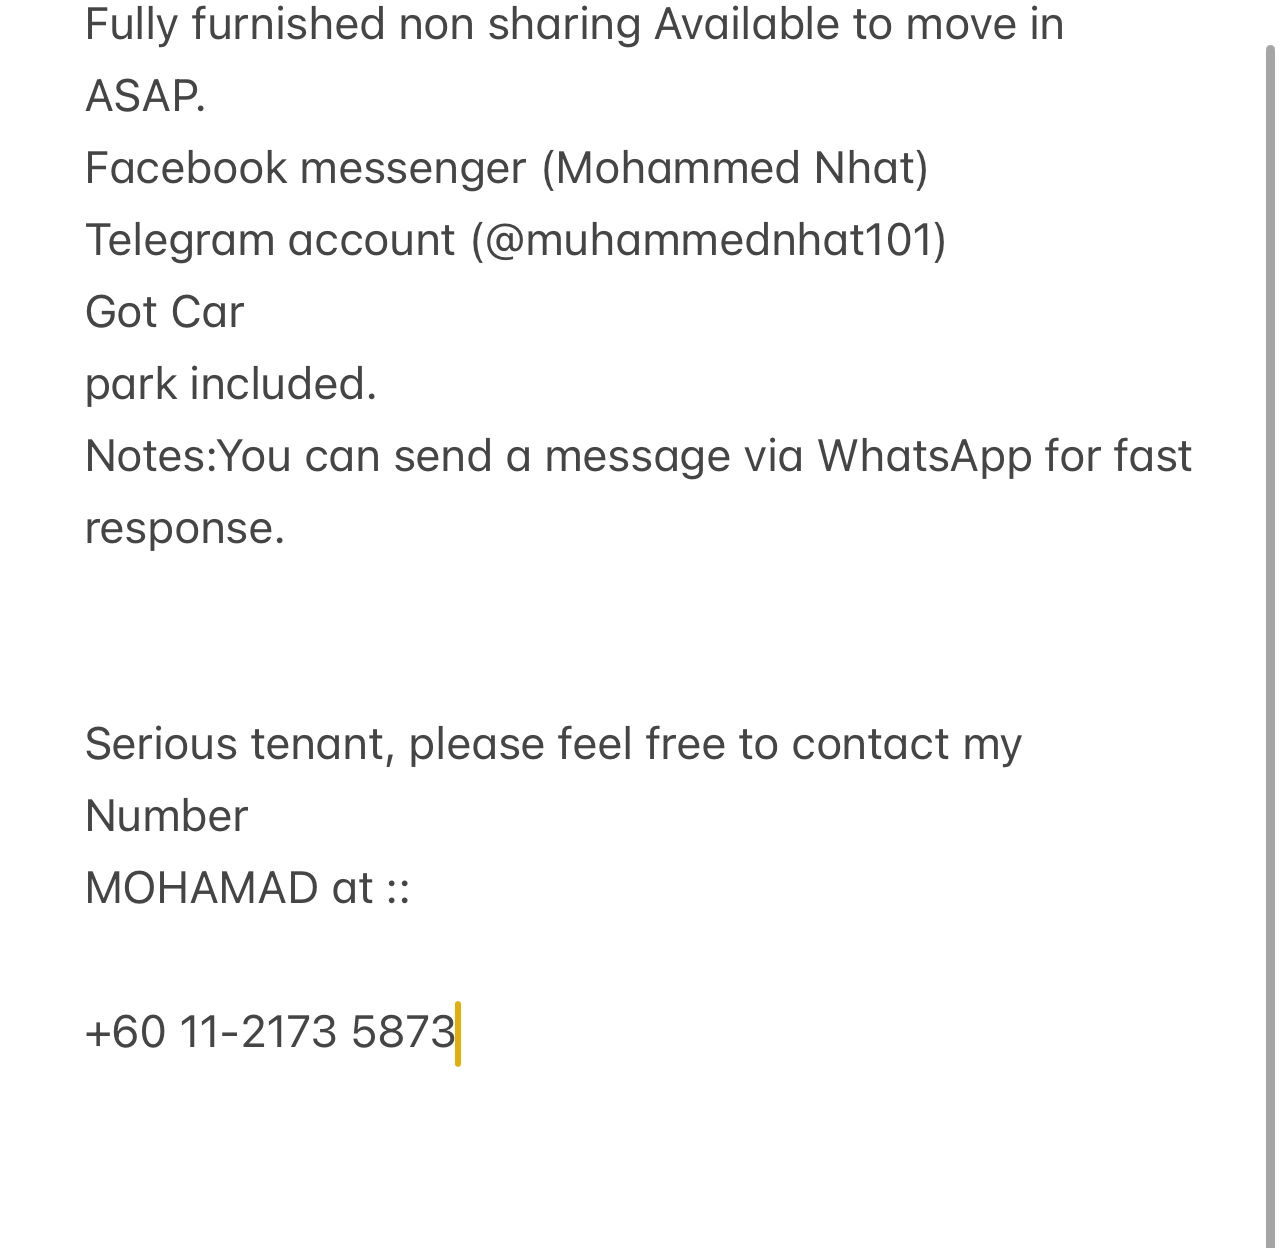 room for rent, studio, jalan kuchai lama, Send the owner a message on WhatsApp/facebook if you want to RENT the unit facebook (Mohammed Nhat)&Telegram(@muhammednhat101) Fully furnished non sharing :(comfortable)